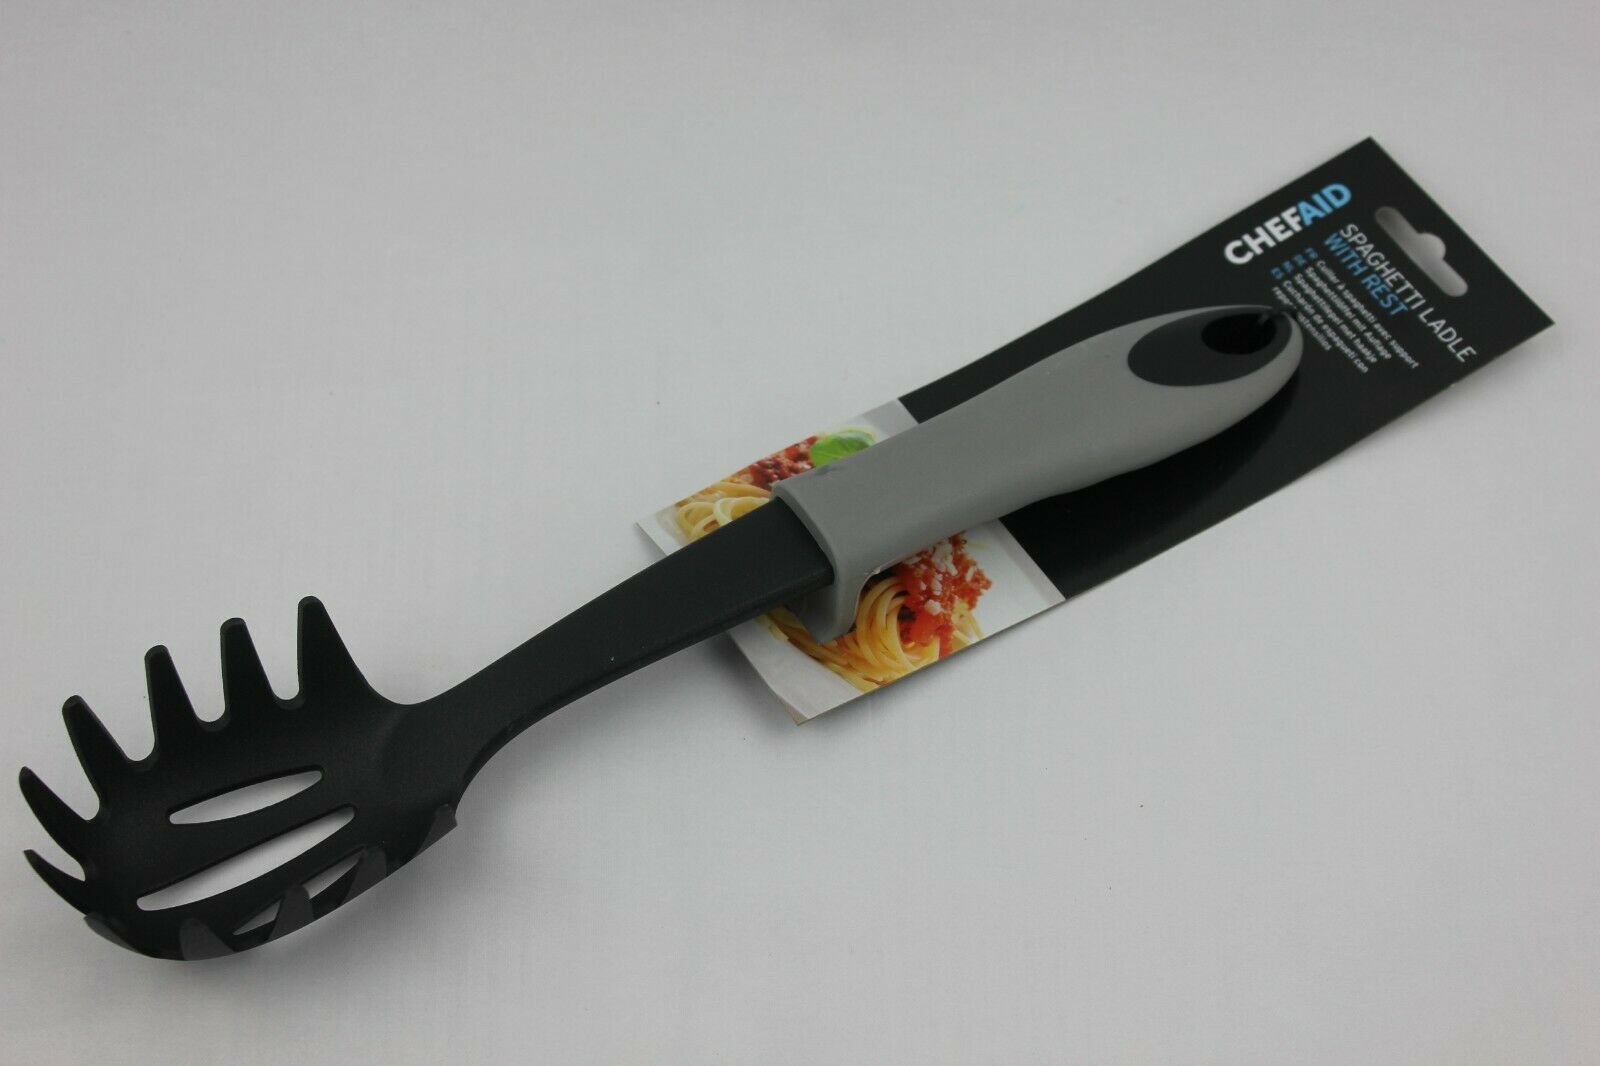 attachment-https://www.cupcakeaddicts.co.uk/wp-content/uploads/imported/2/Chef-Aid-Black-Nylon-Spaghetti-Ladle-with-Rest-Noodles-Pasta-Serving-324231152452-3.jpg